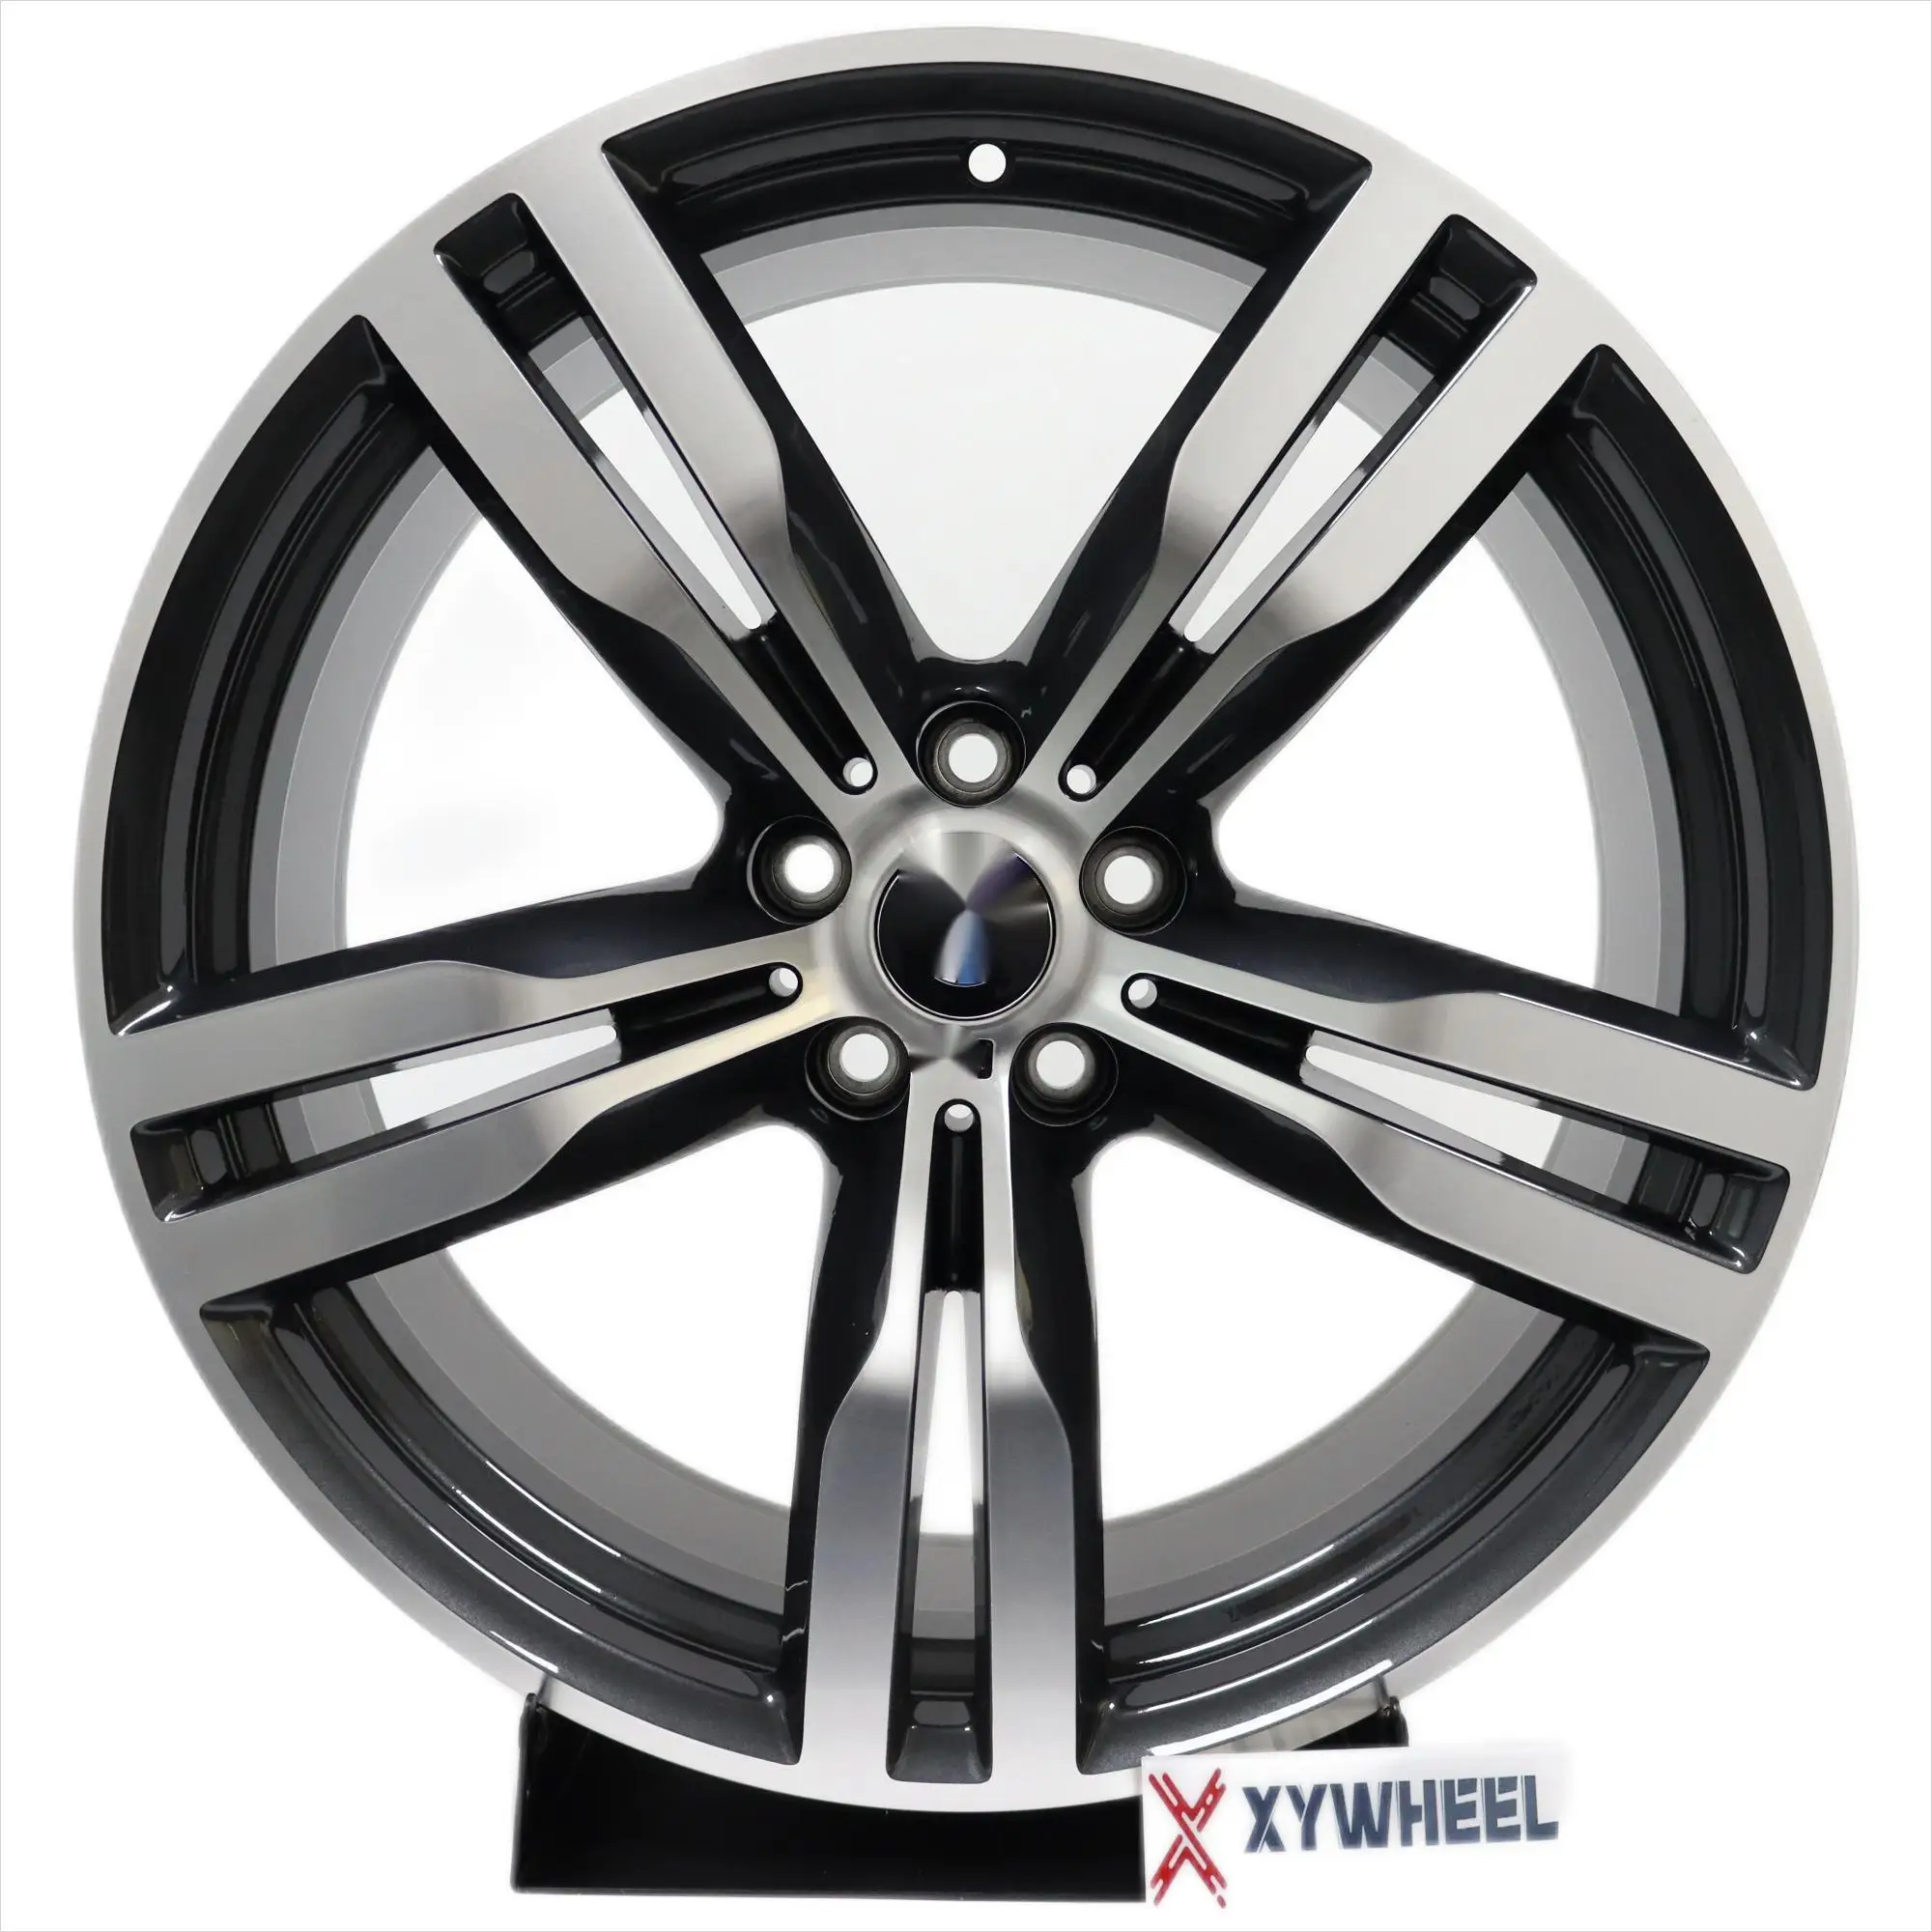 

Wholesale 7 Series 648M 20 inch original 99%new genuine Casted 5*112 66.6 wheels rims 36116868051 suitable for BMWs 7/8 Series